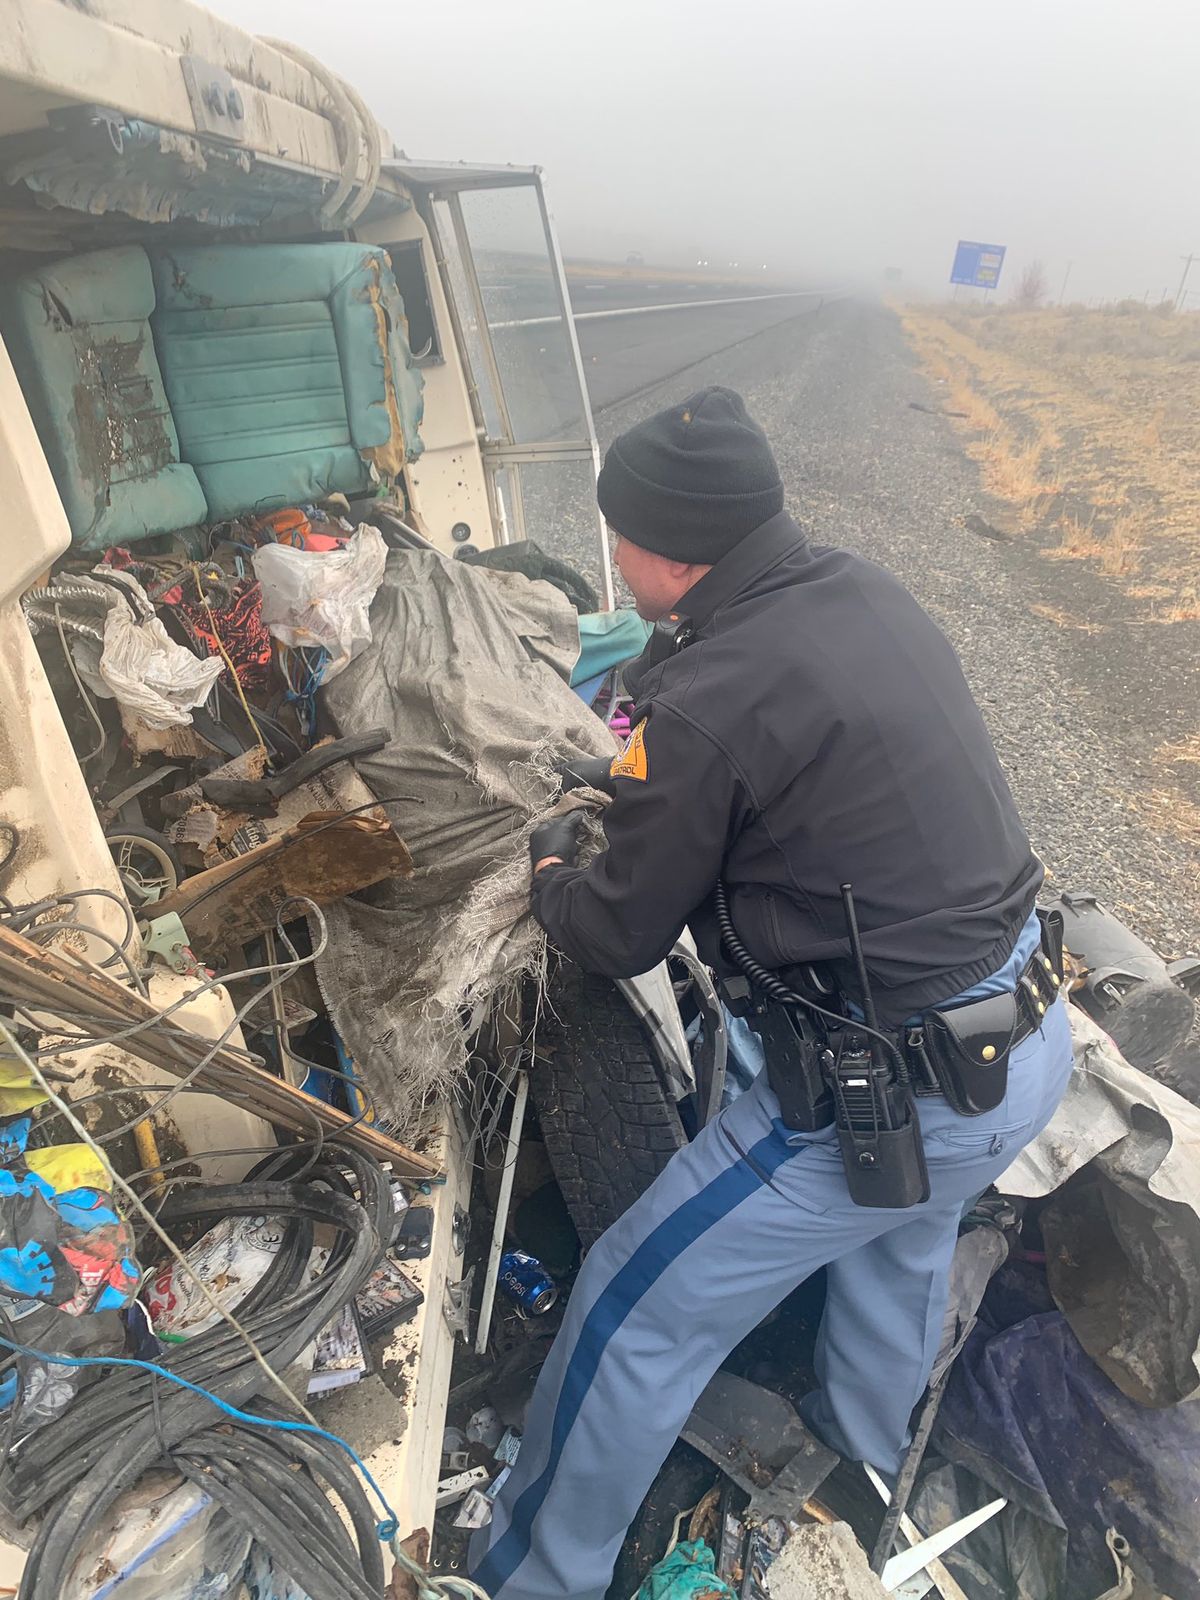 Trooper Sage Schafer found four small kittens in a toppled over boat on the side of I-90 near Moses Lake on Friday, Nov. 27, 2020.  (John Bryant, Washington State Patrol)